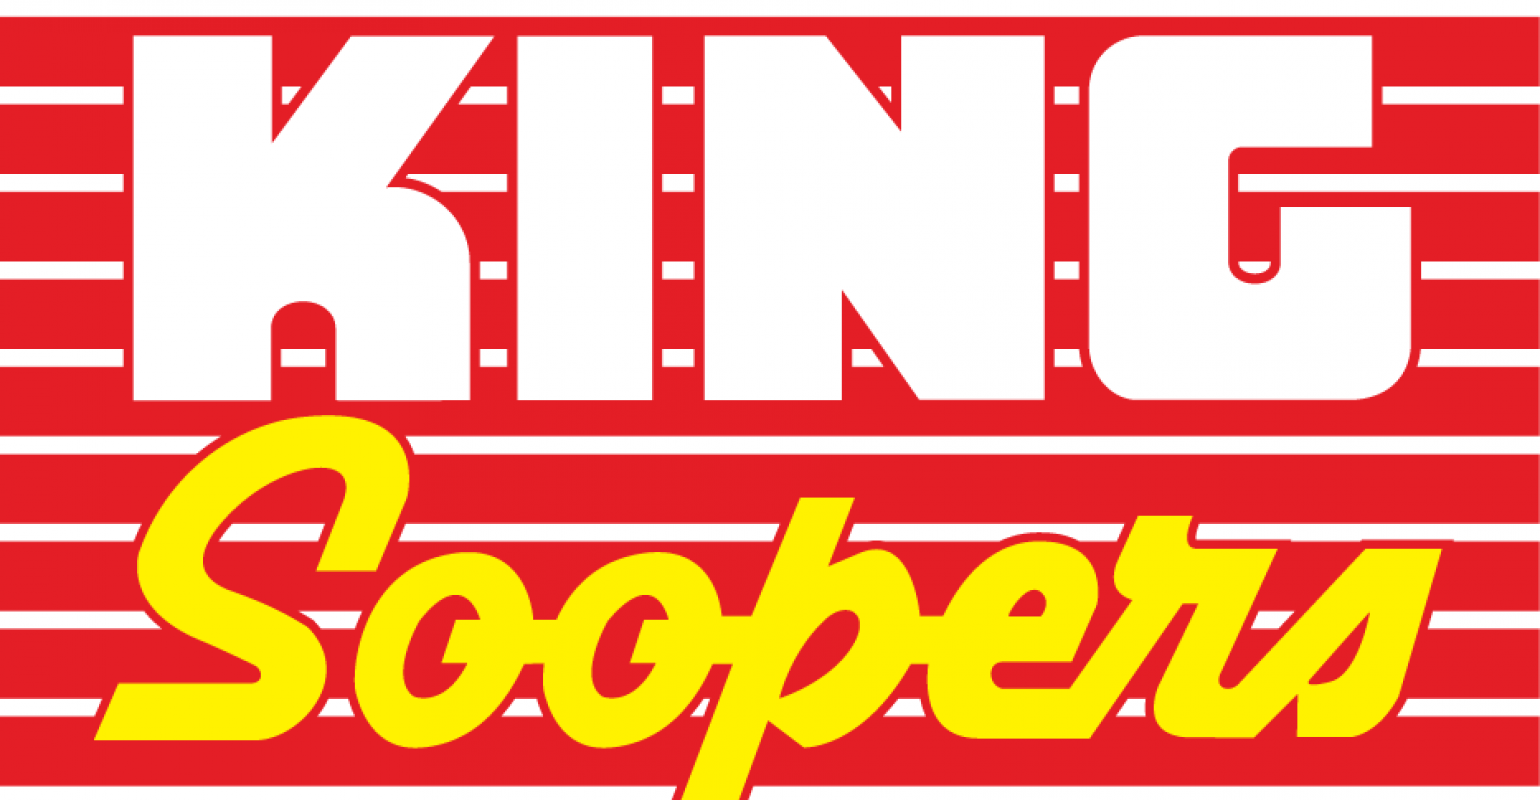 King Soopers - Elitch Gardens Theme and Water Park - wide 1